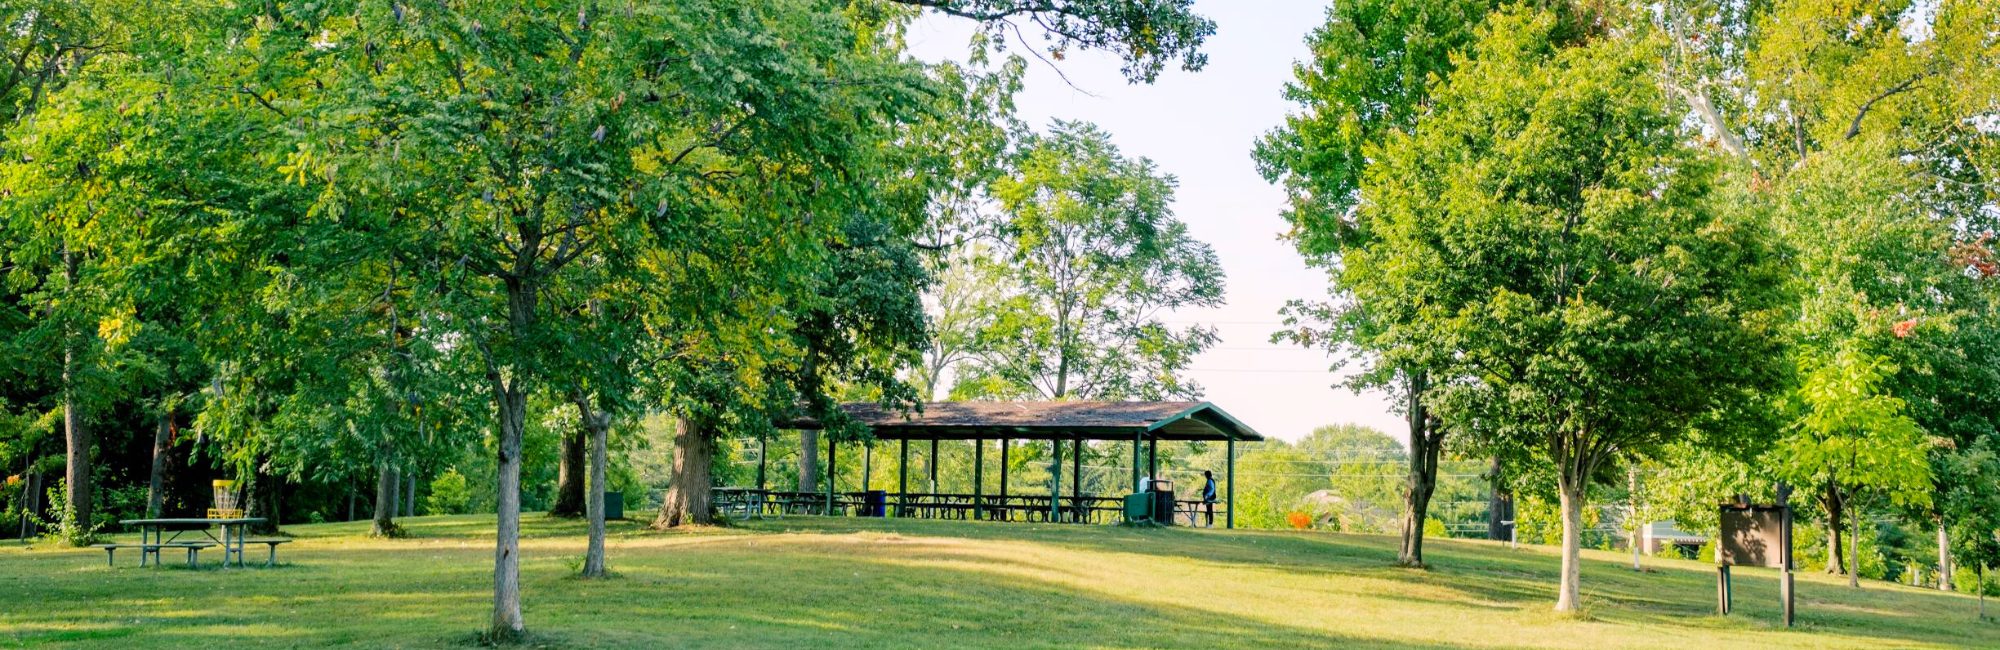 park with a picnic shelter, trees, and greenspace on a small hill